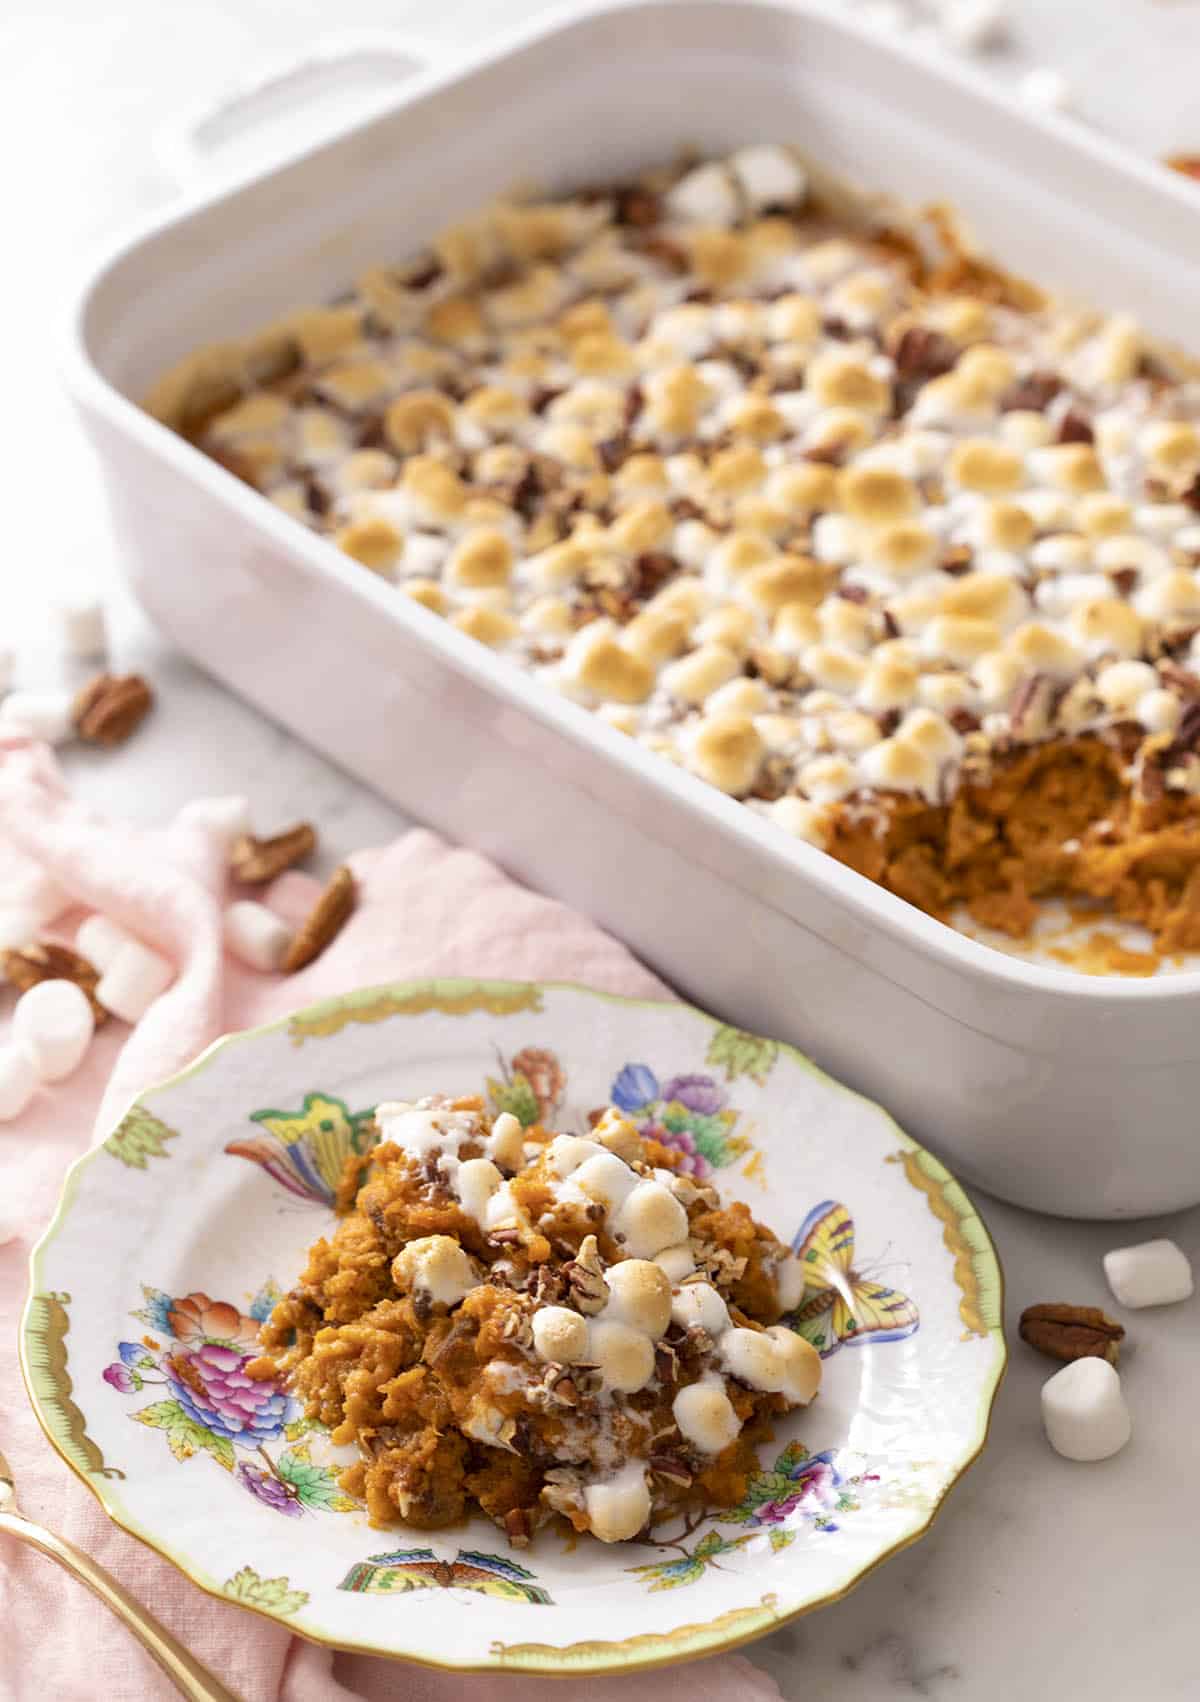 A sweet potato casserole topped with marshmallows and pecans.